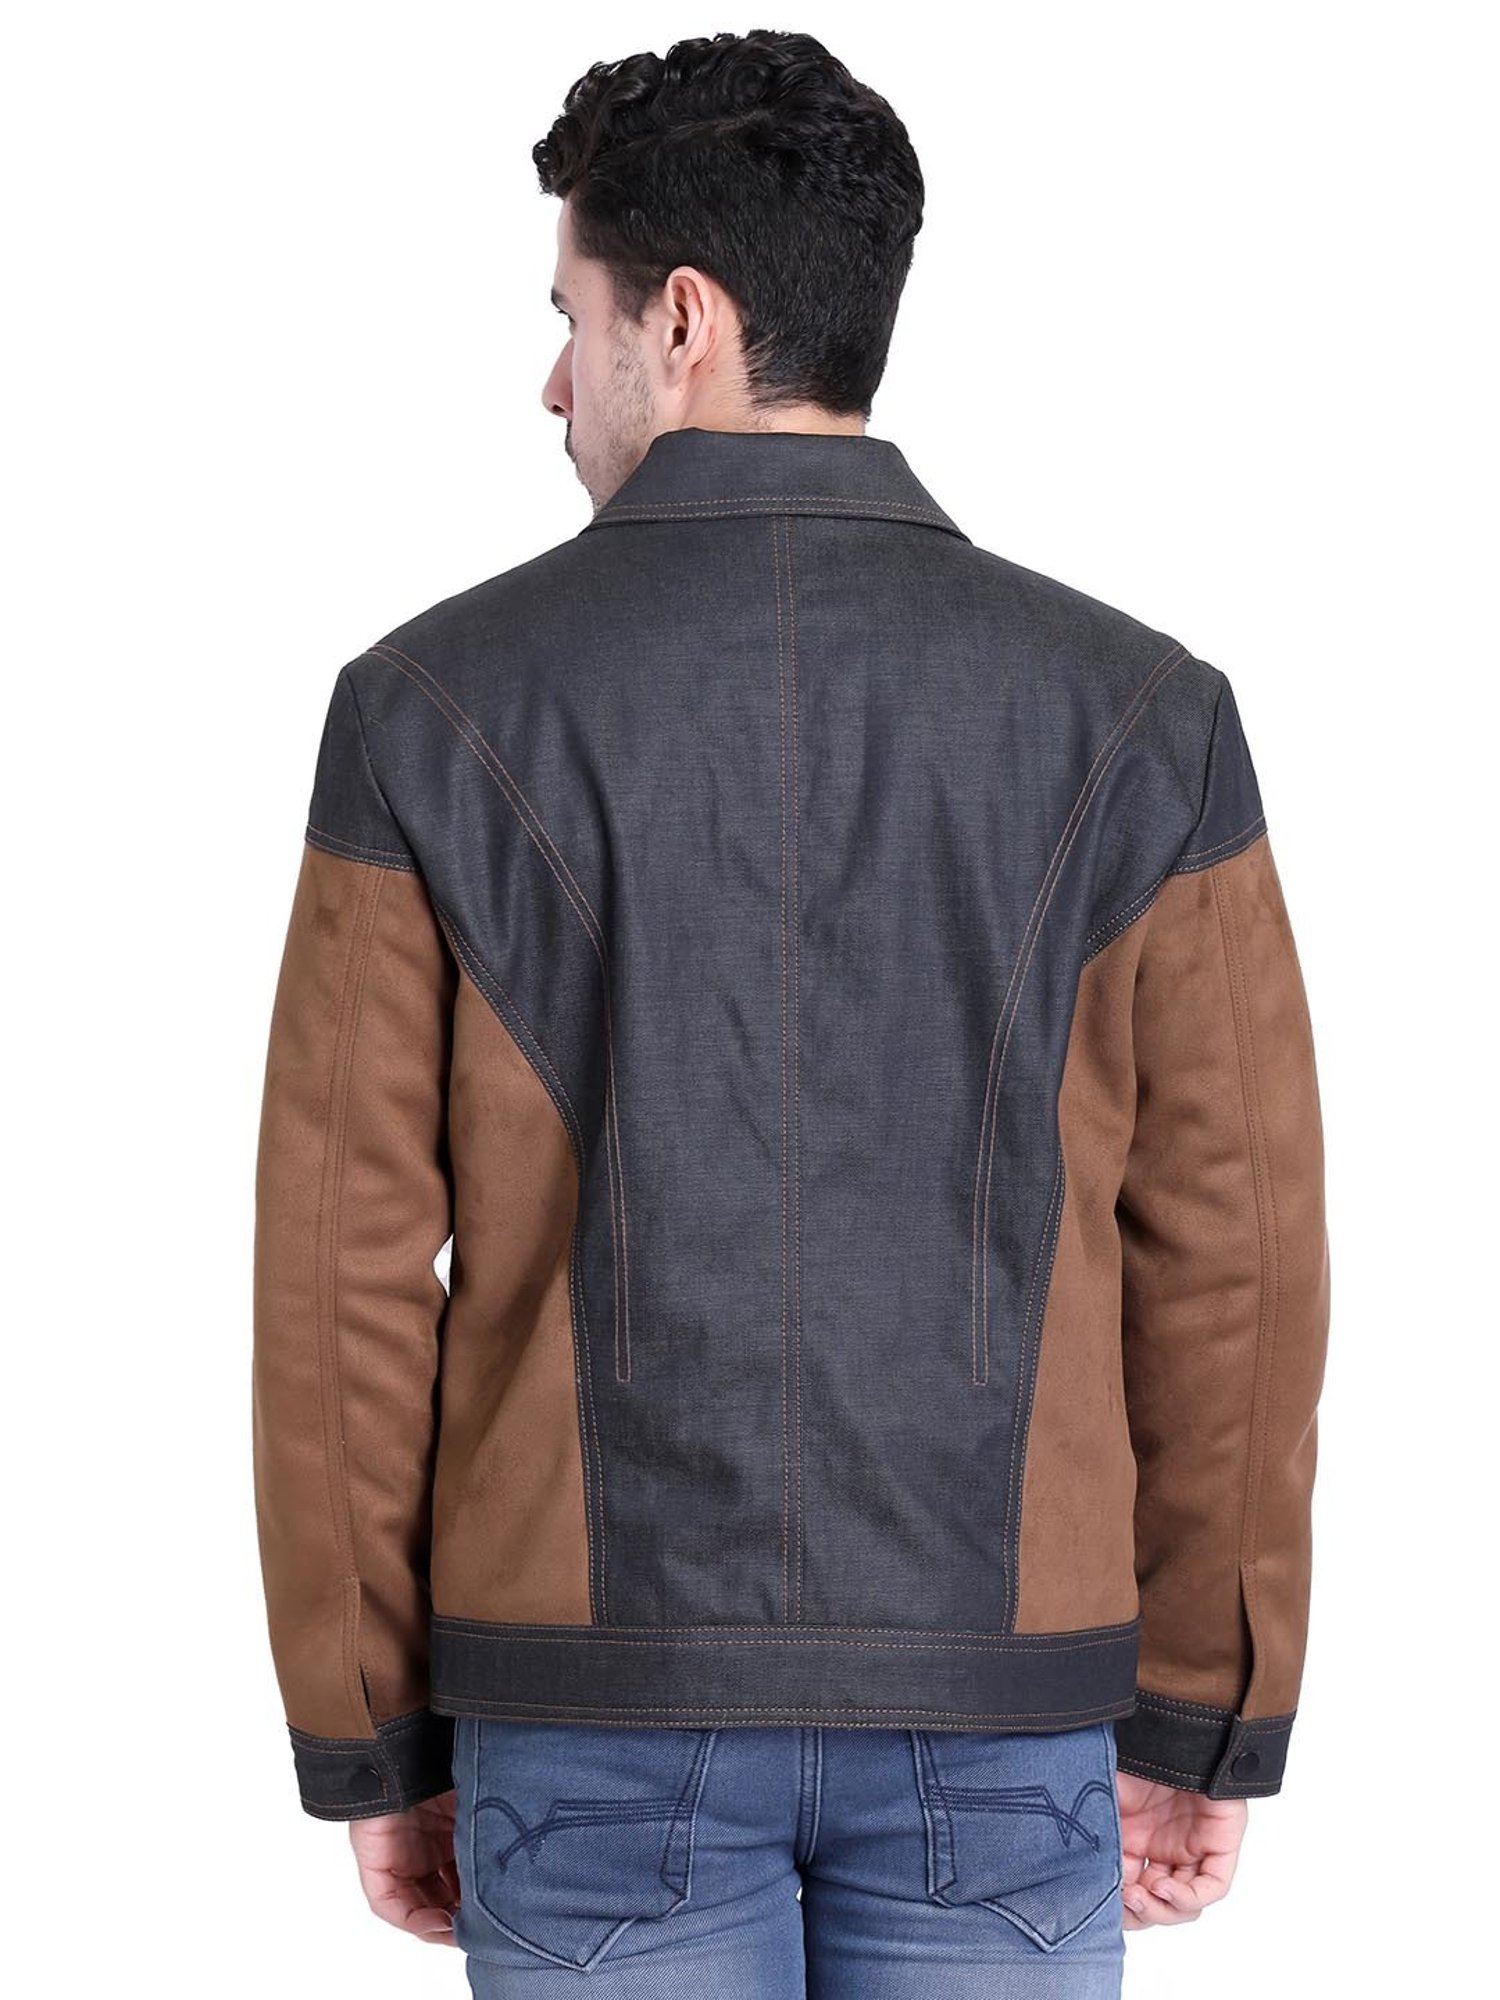 Justanned Tan Suede Leather Jackets